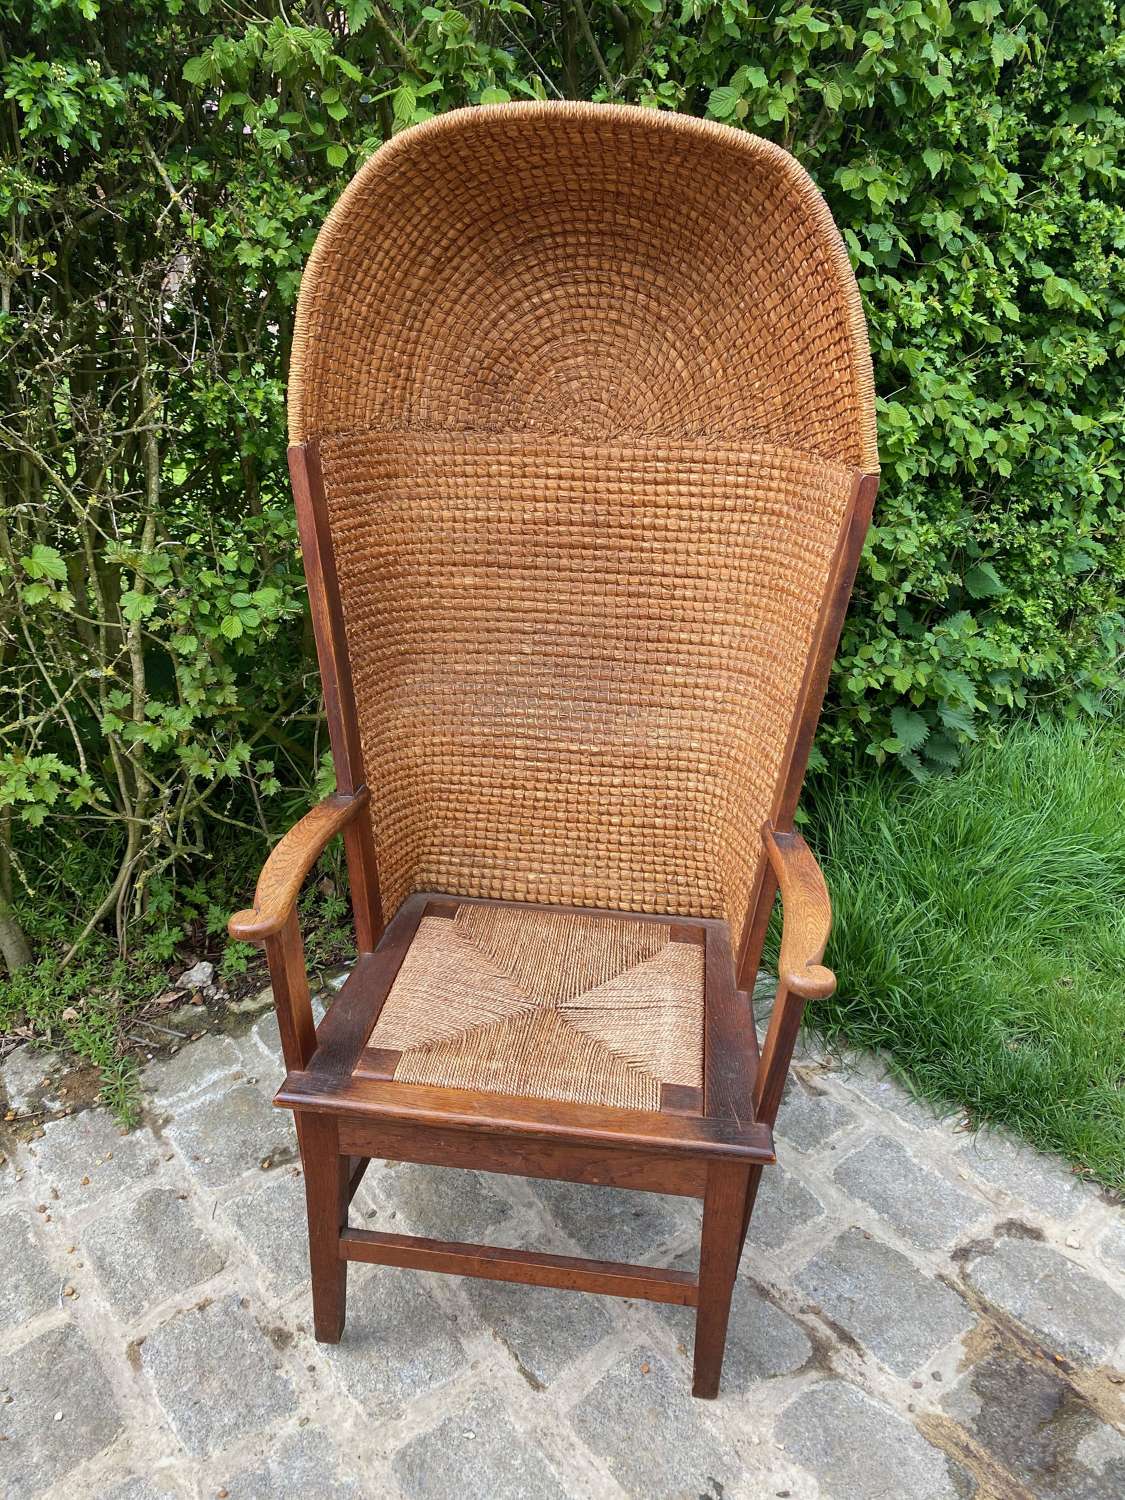 HOODED ORKNEY CHAIR STAMPED LIBERTY OF LONDON & CO.